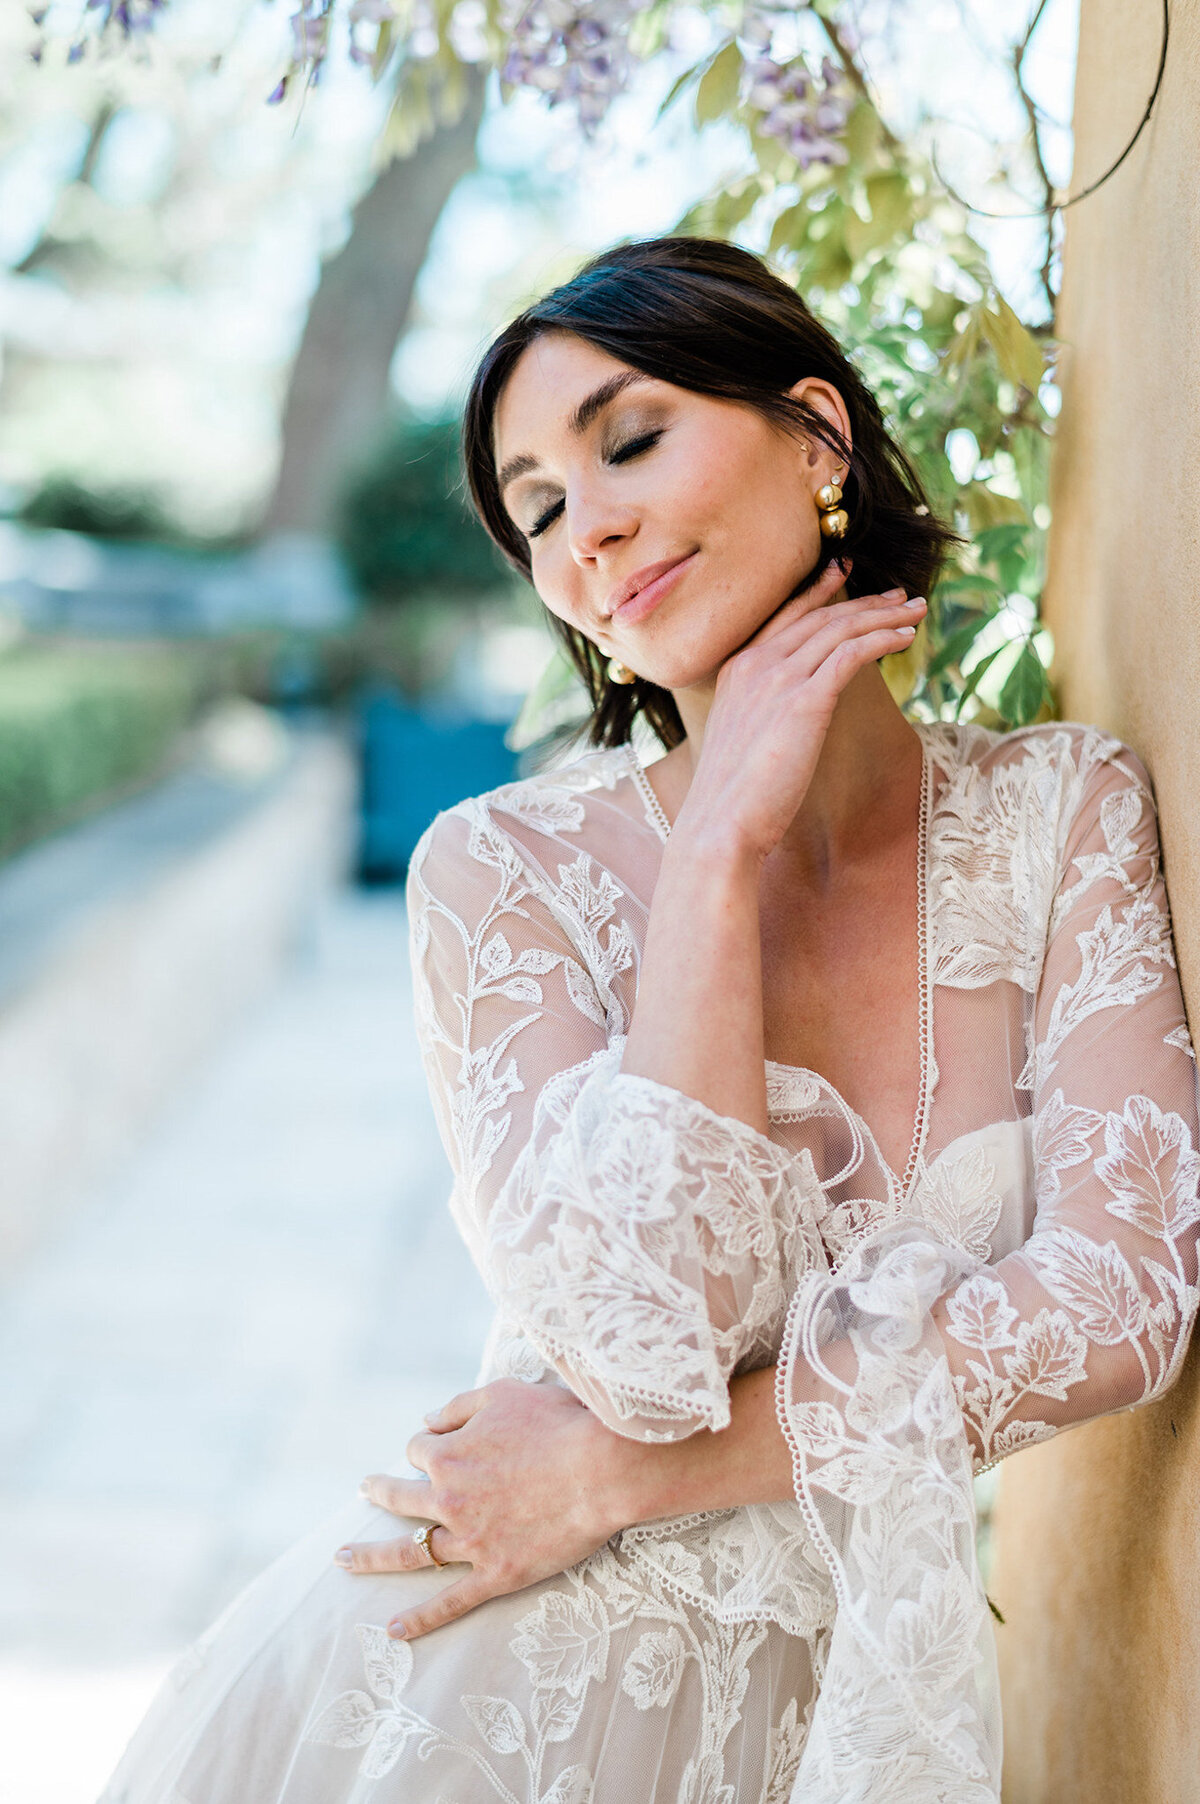 With a focus on elegance and artistry, our luxury photography services in France create visual treasures of your wedding day. Every image tells a story of love, captured through a fine art lens.